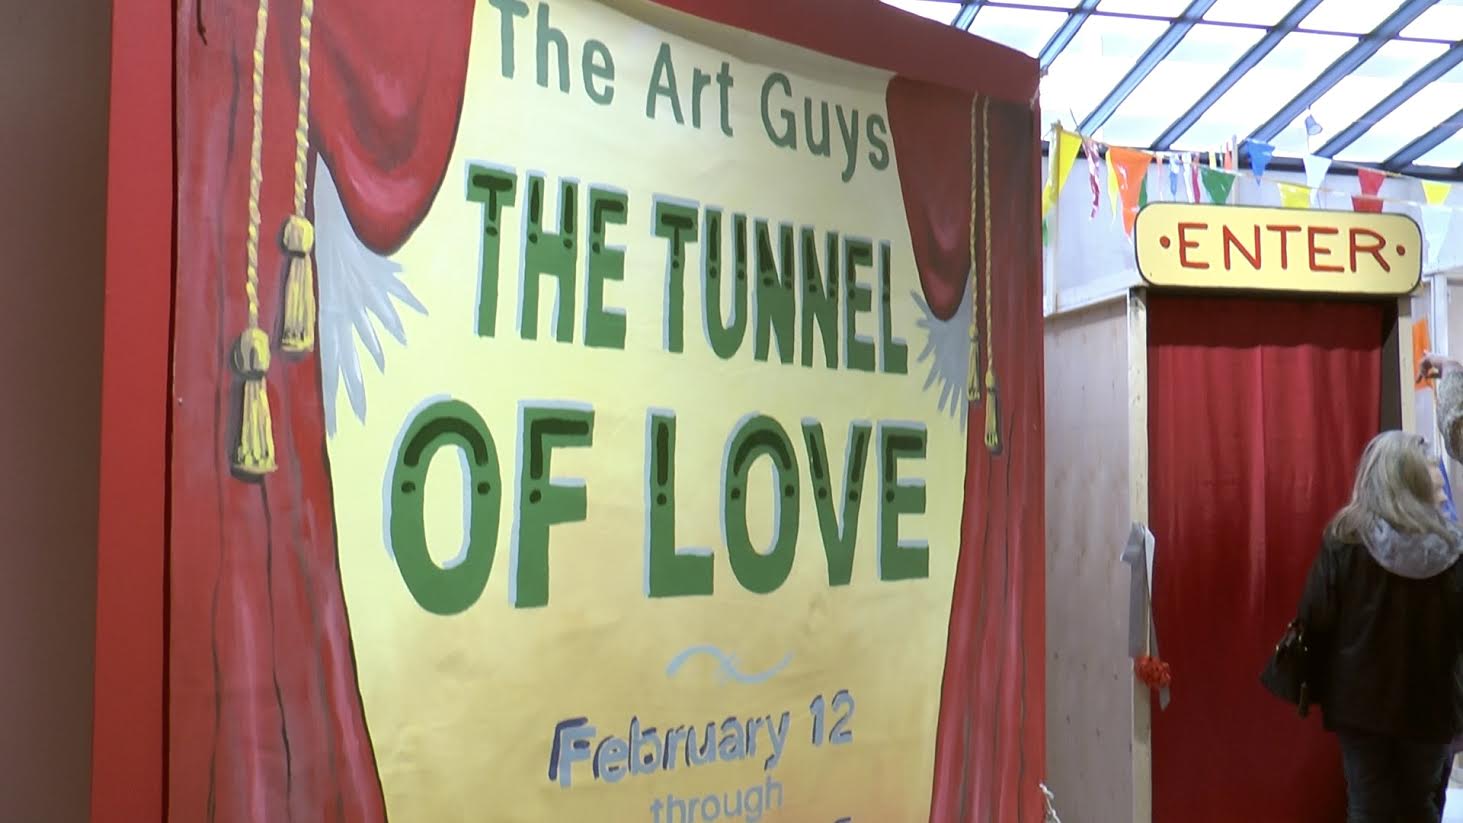 Photo from Art Guys installation, the Tunnel of Love